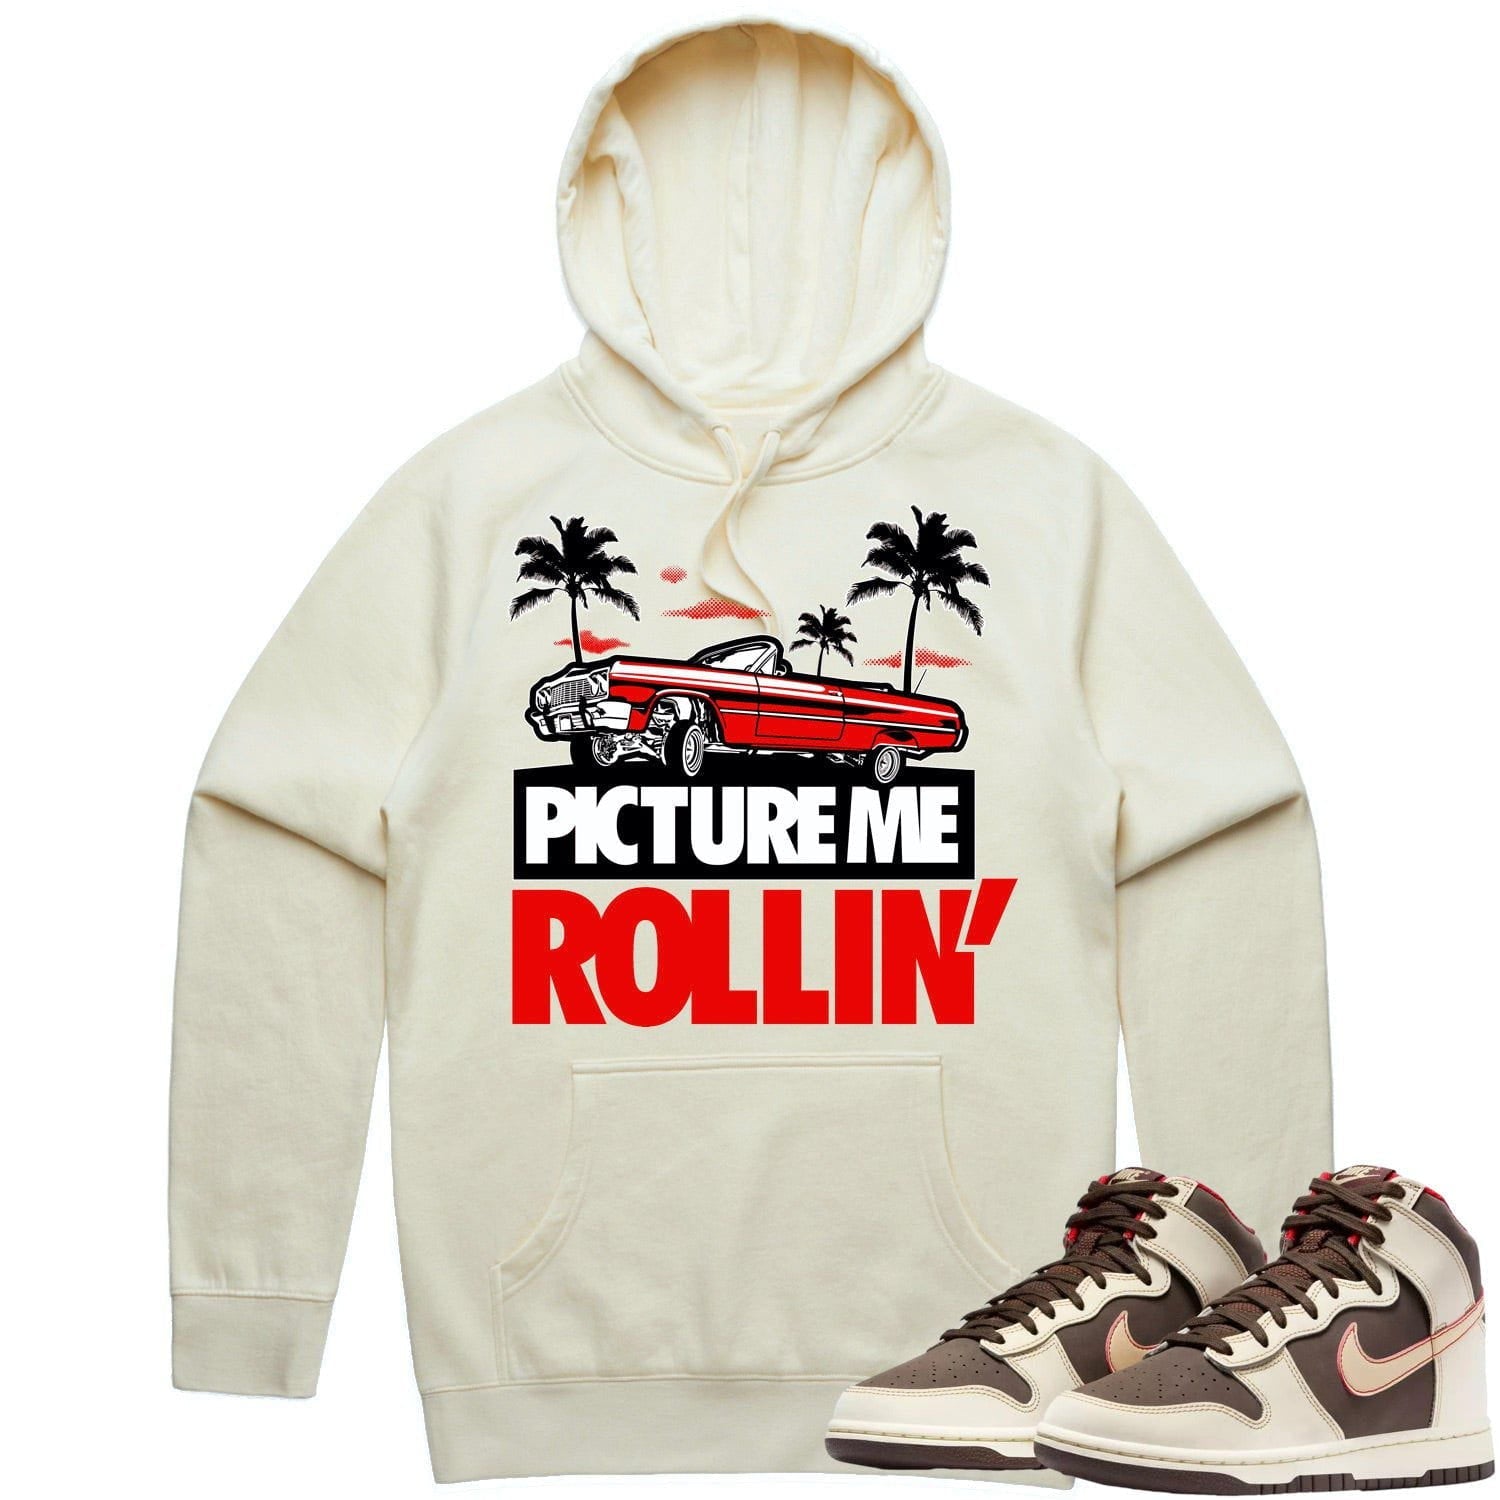 Baroque Brown Dunks Hoodie - Dunks Hoodies - Red Picture